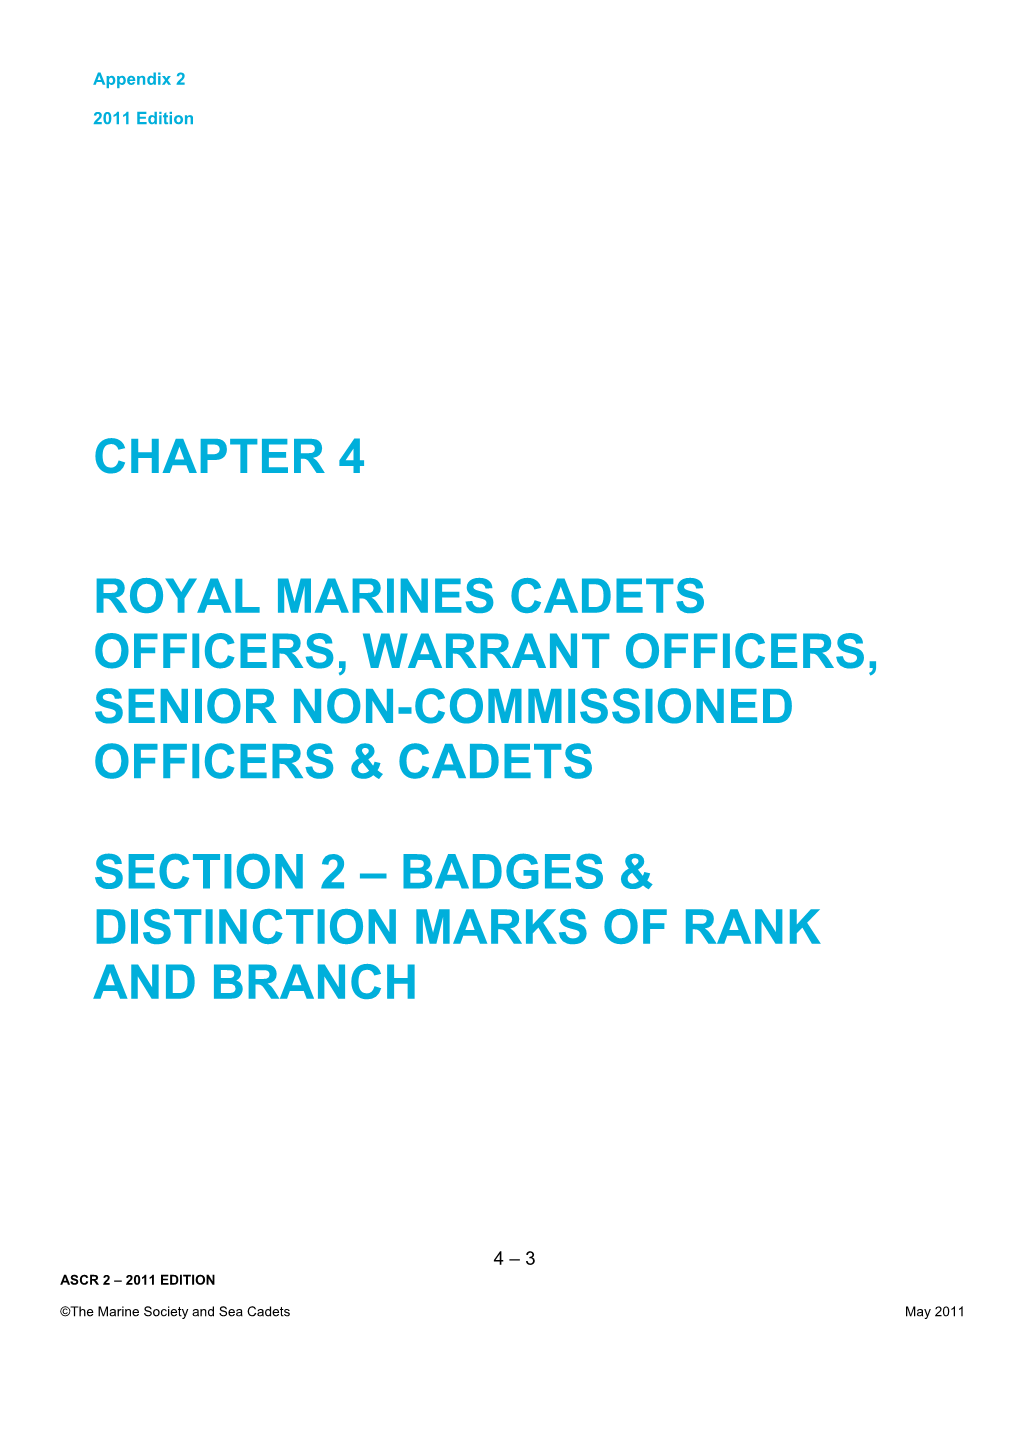 Chapter 4 Royal Marines Cadets Officers, Warrant